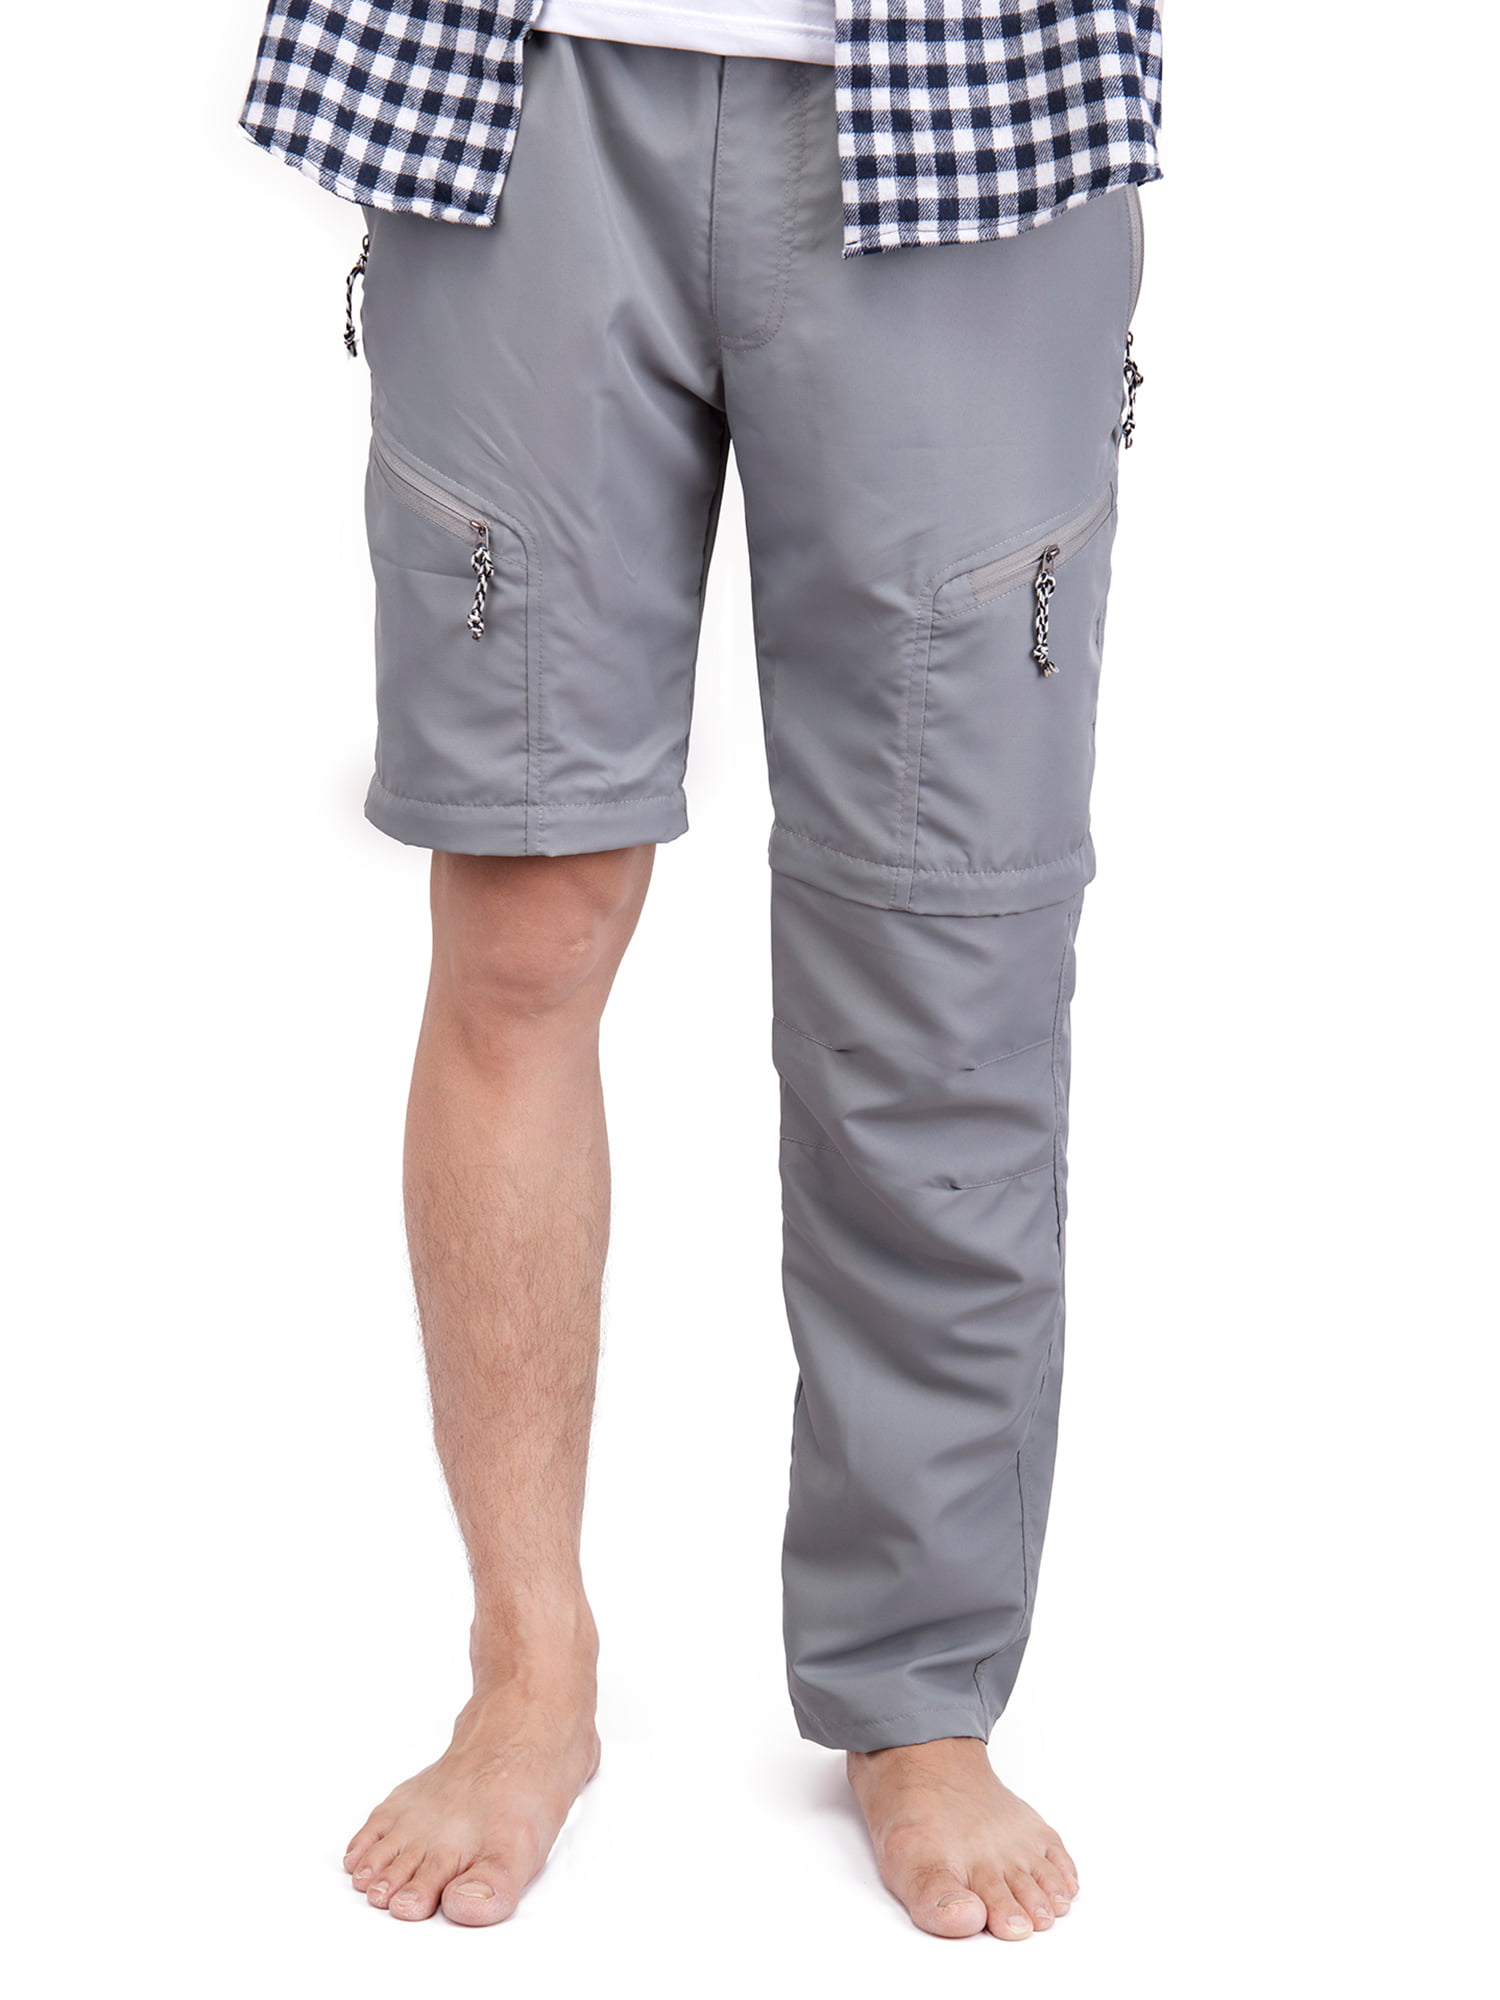 Mens Outdoor Anytime Quick Dry Convertible Lightweight Hiking Fishing Zip Off Cargo Work Pant